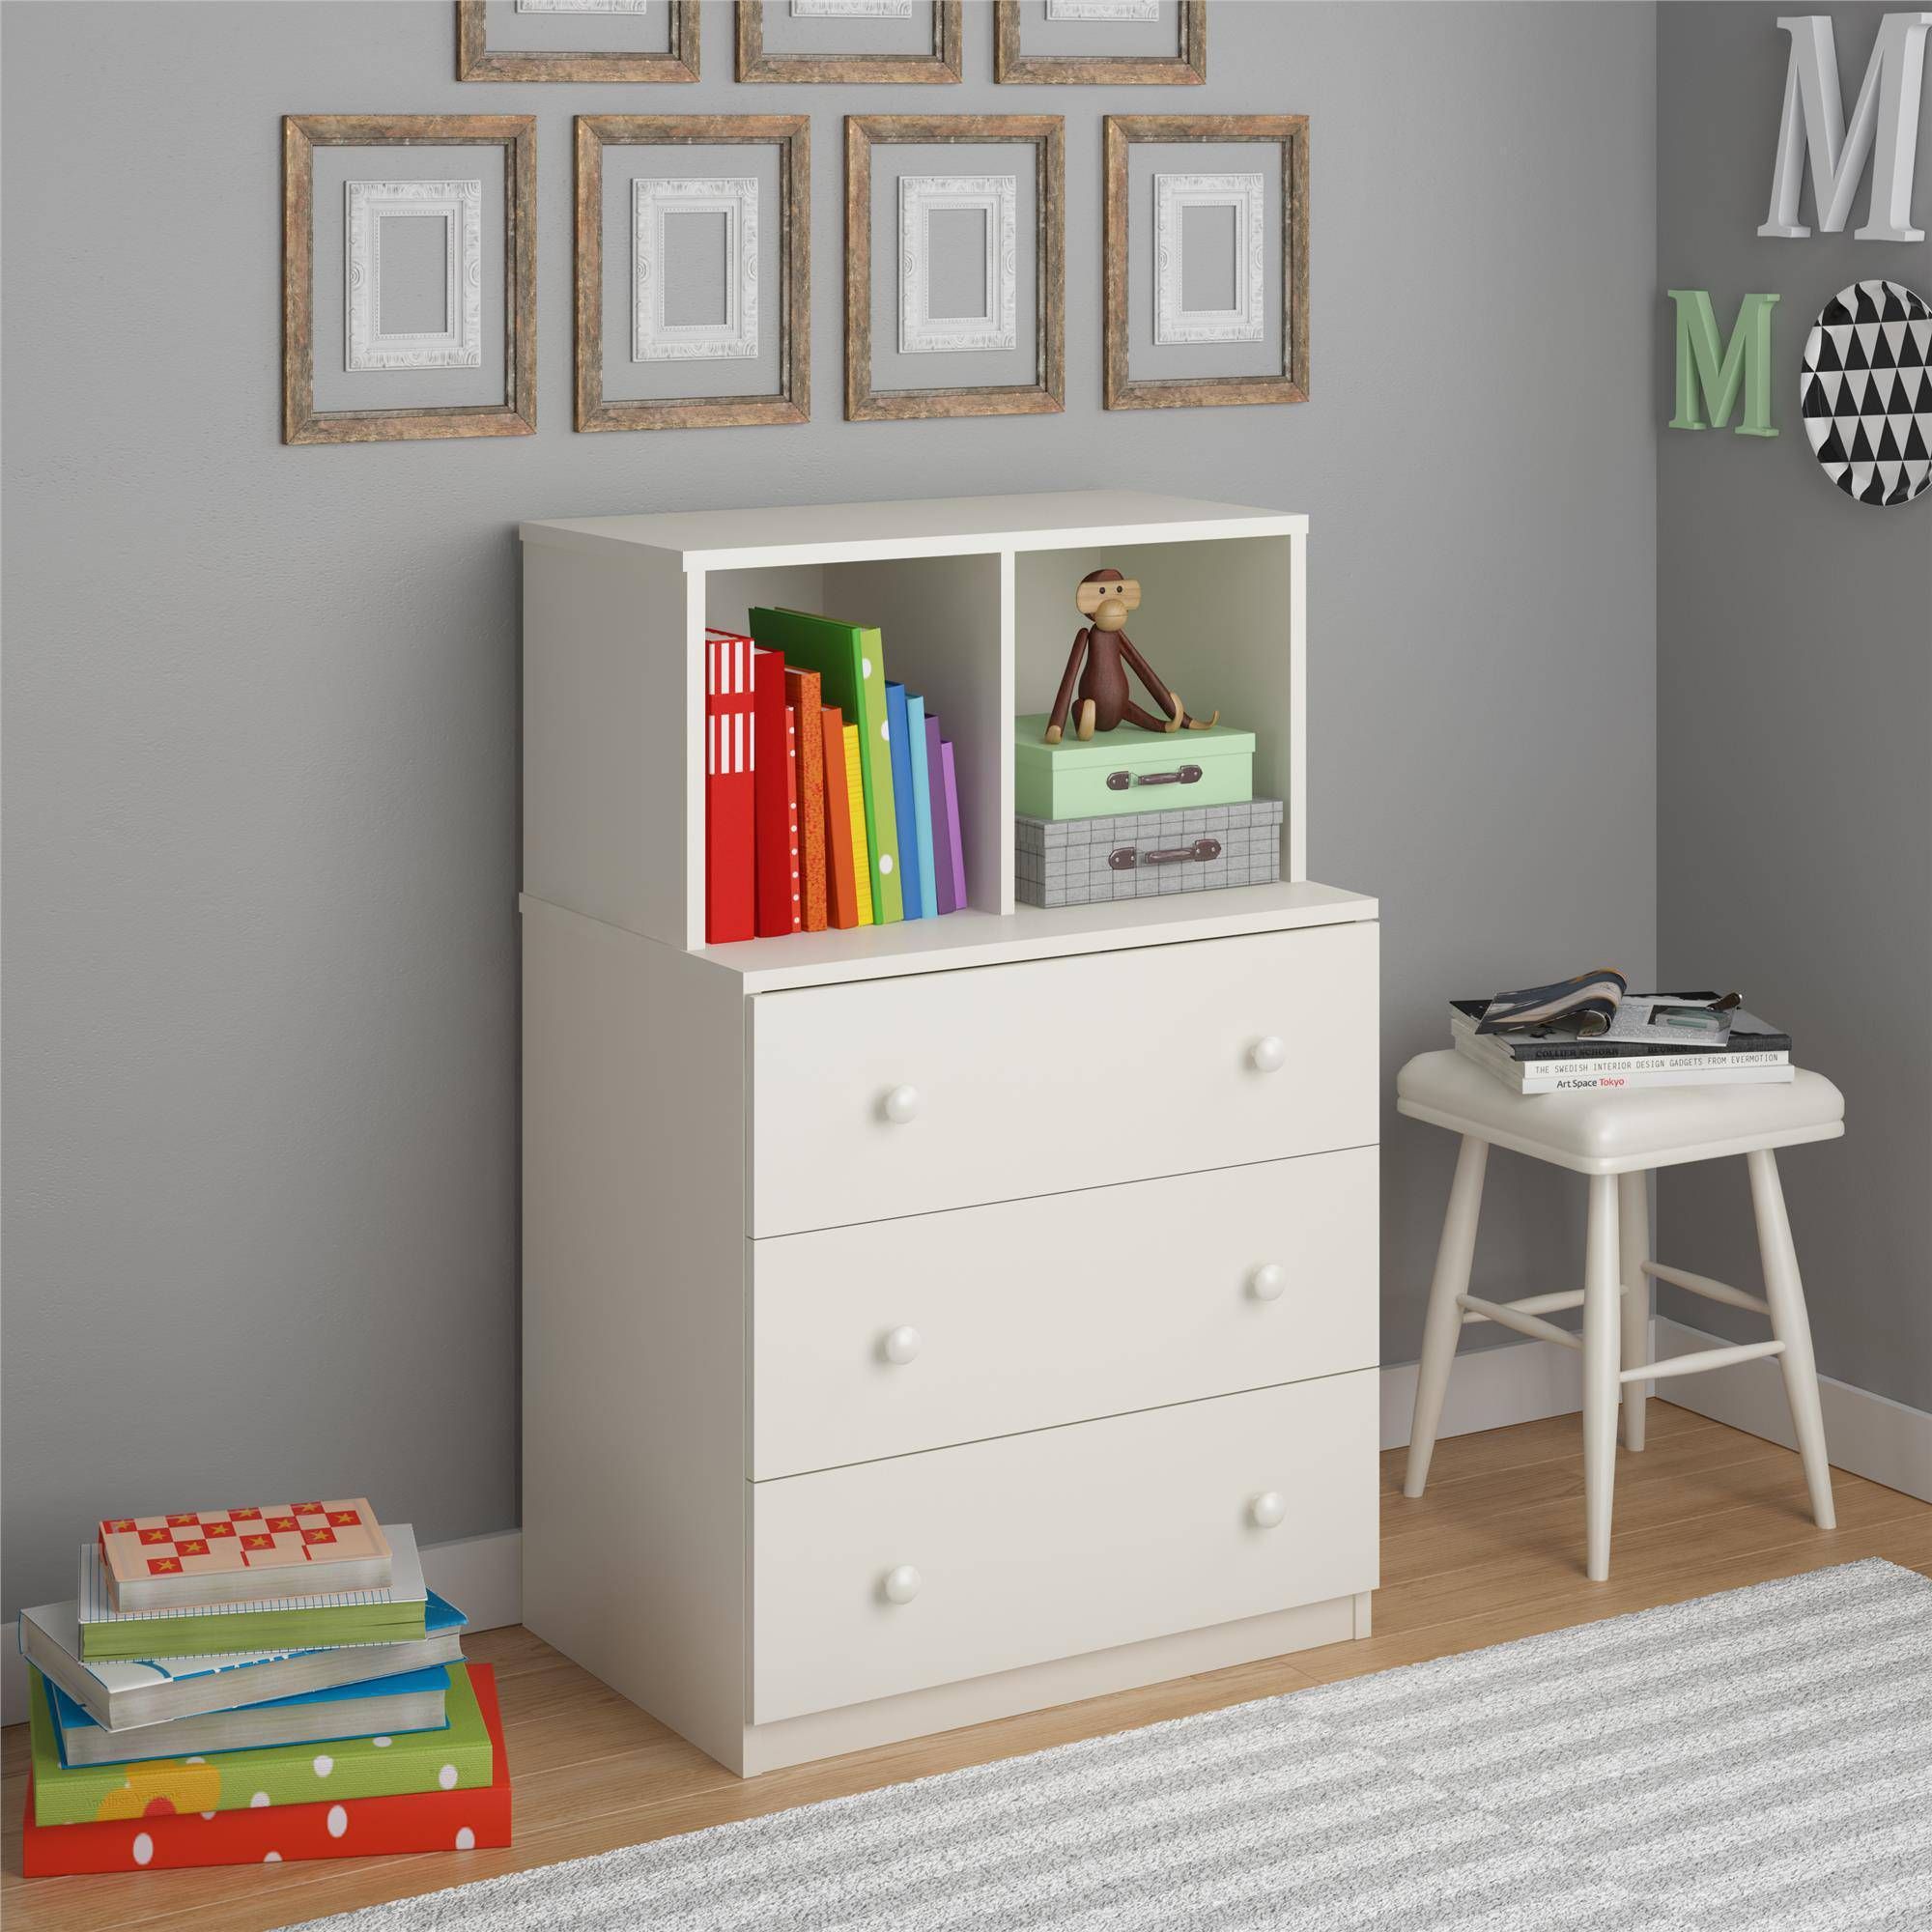 Home | Kids Dressers, Dresser Drawers, Furniture Deals Within Graphite 2 Drawer Compact Desks (View 8 of 15)